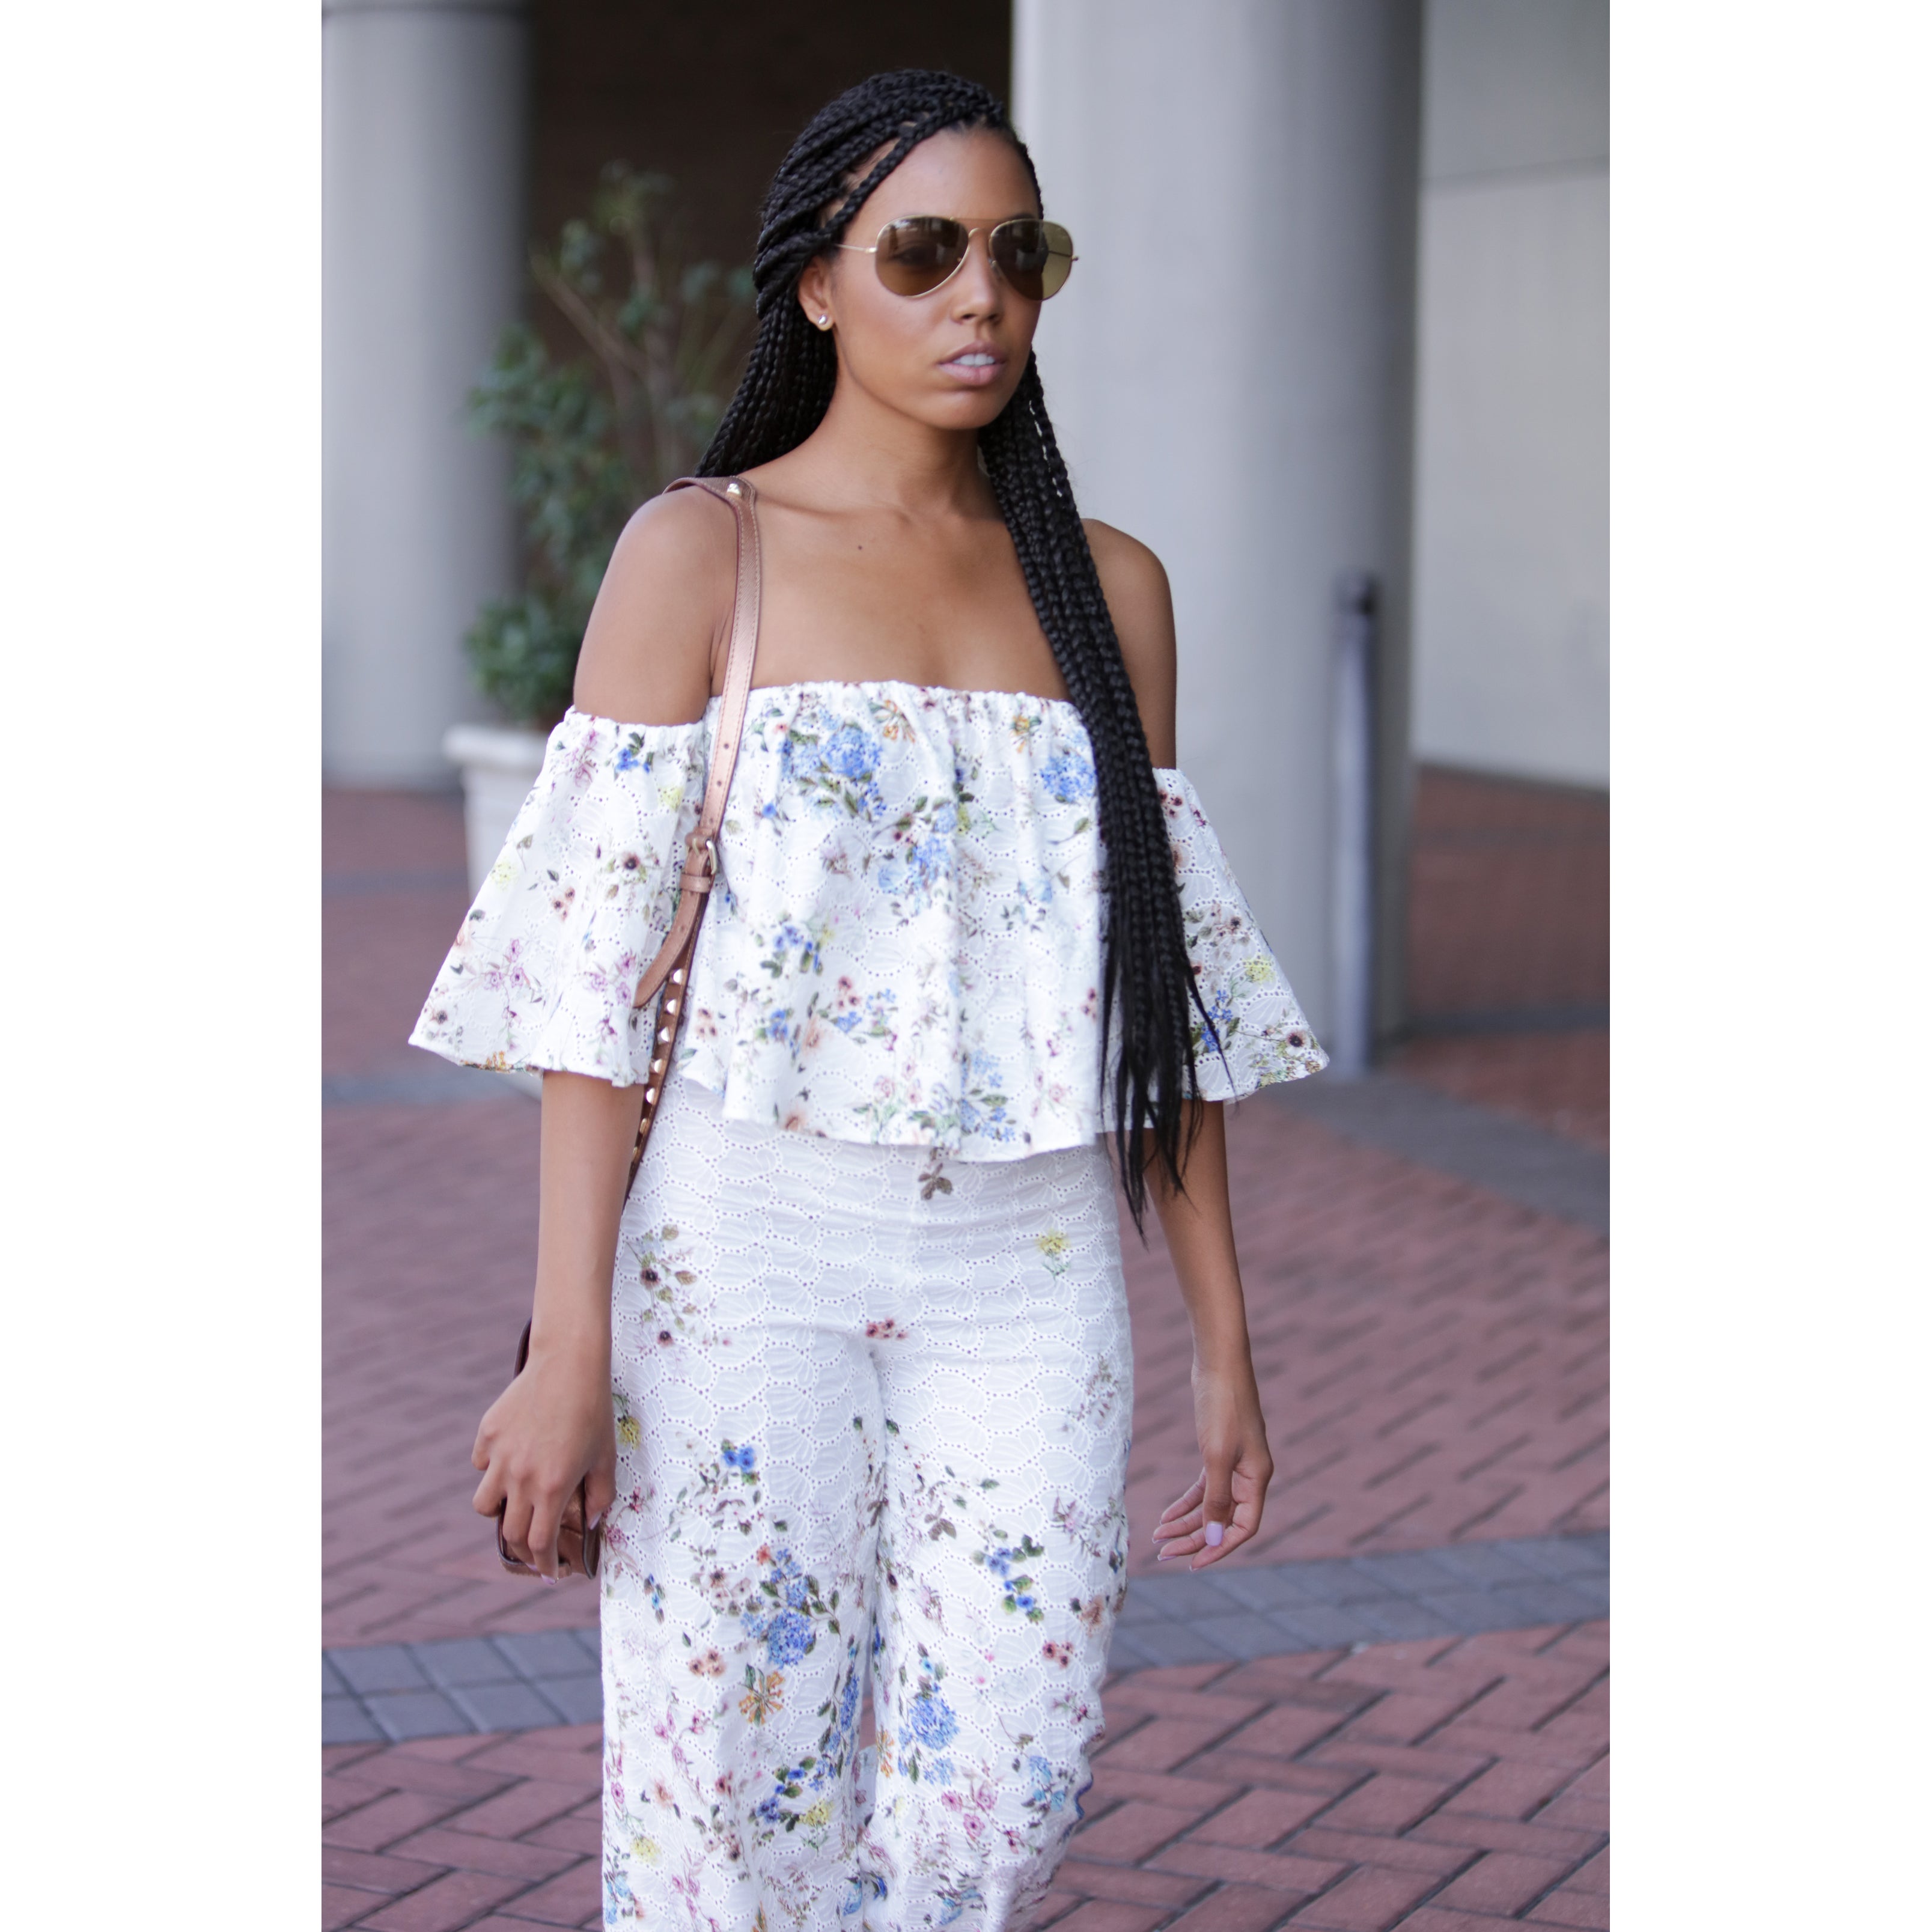 All The Best Street Style From ESSENCE Festival 2016
